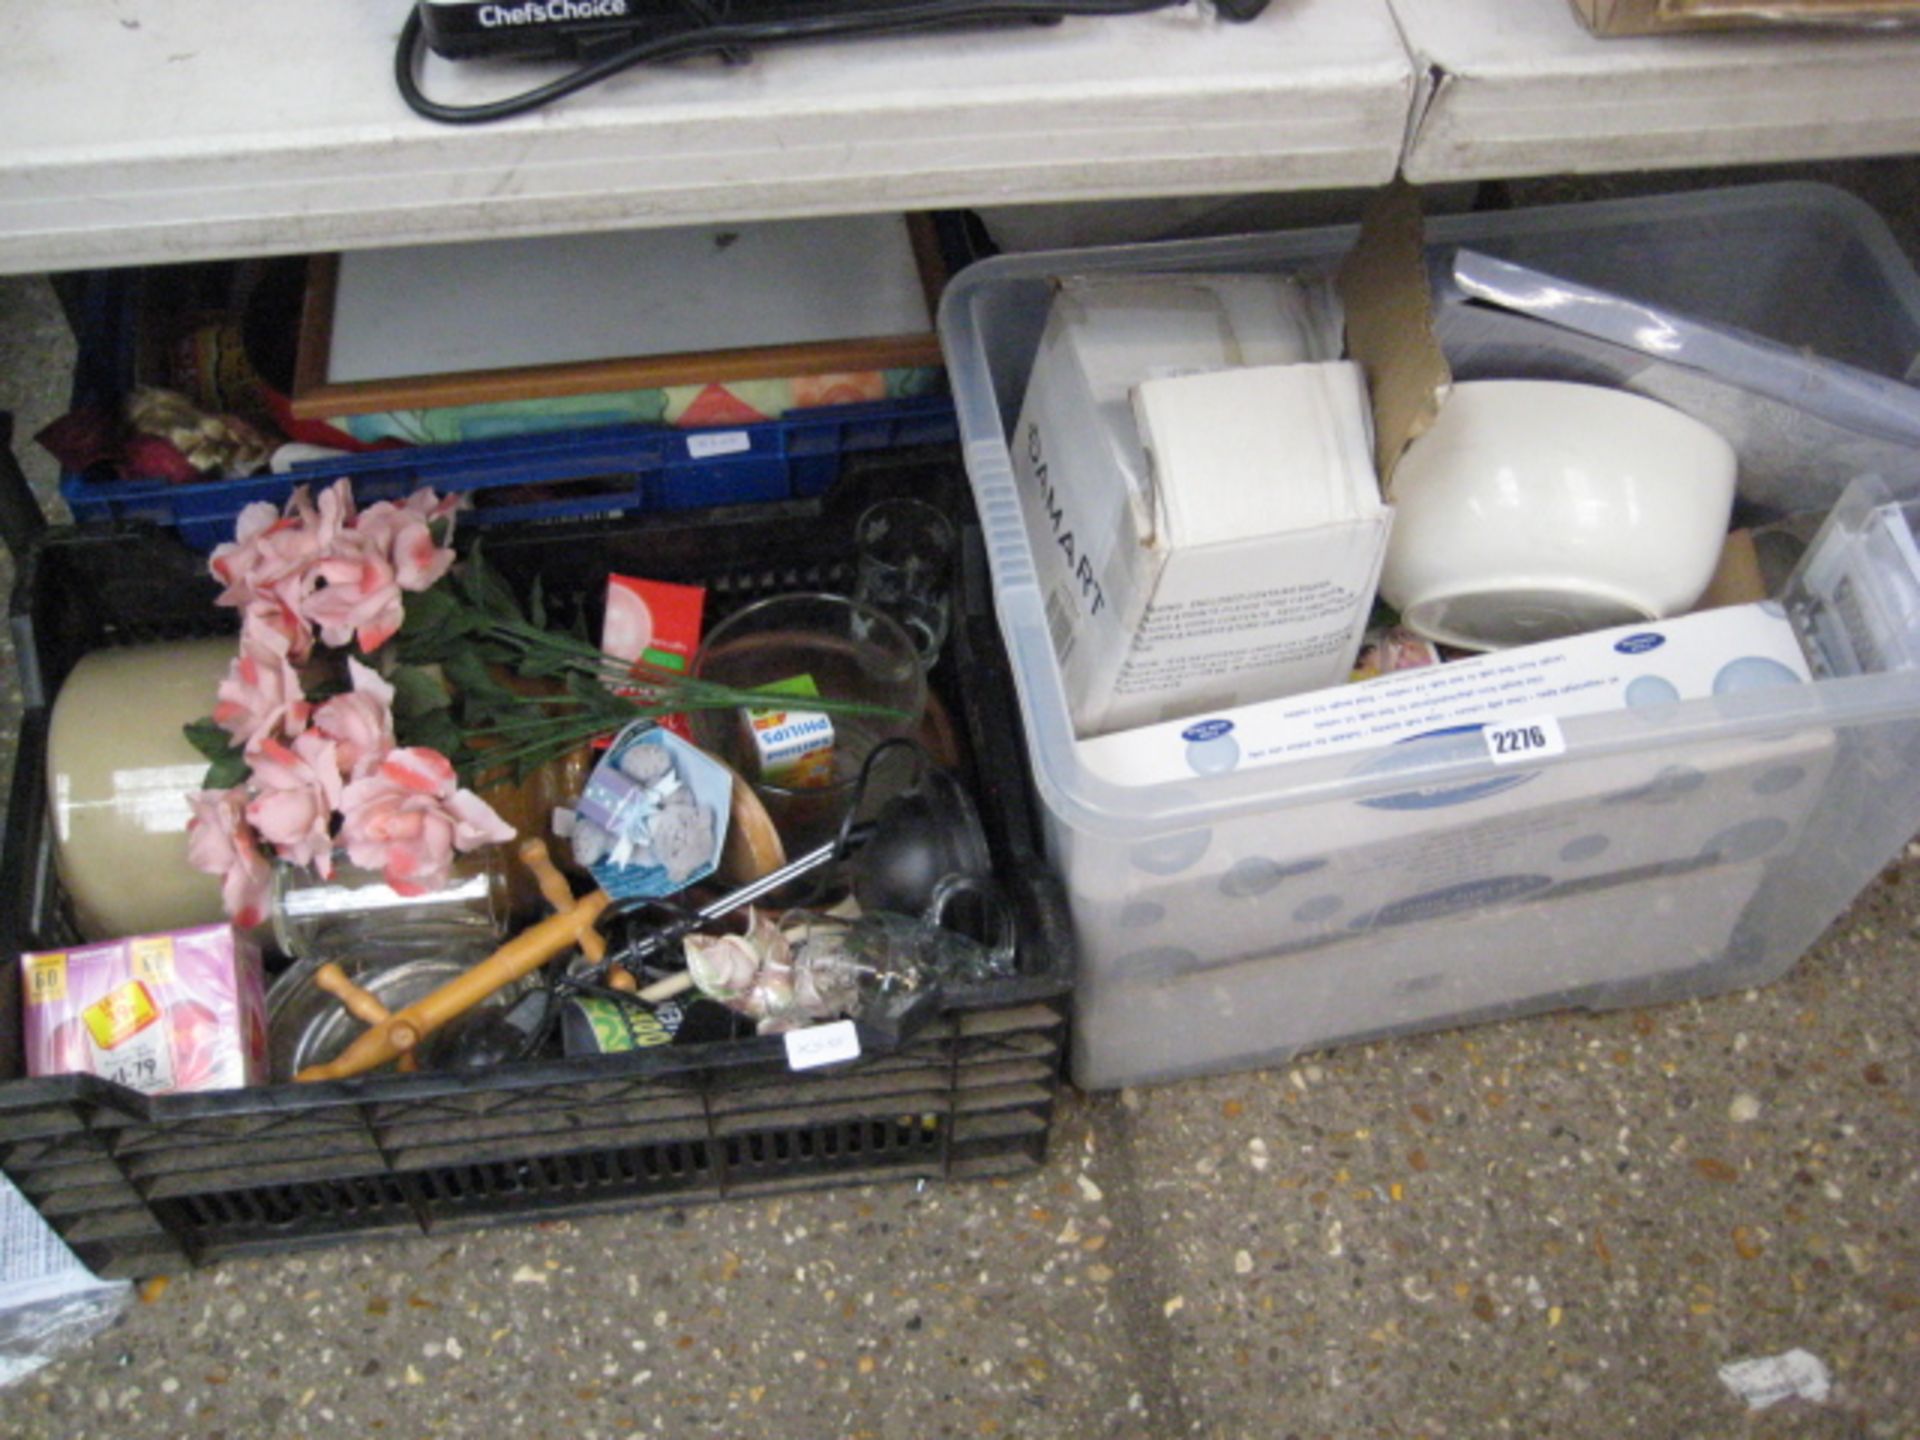 Under bay of mixed housewares incl. ceramics, glass and kitchenware